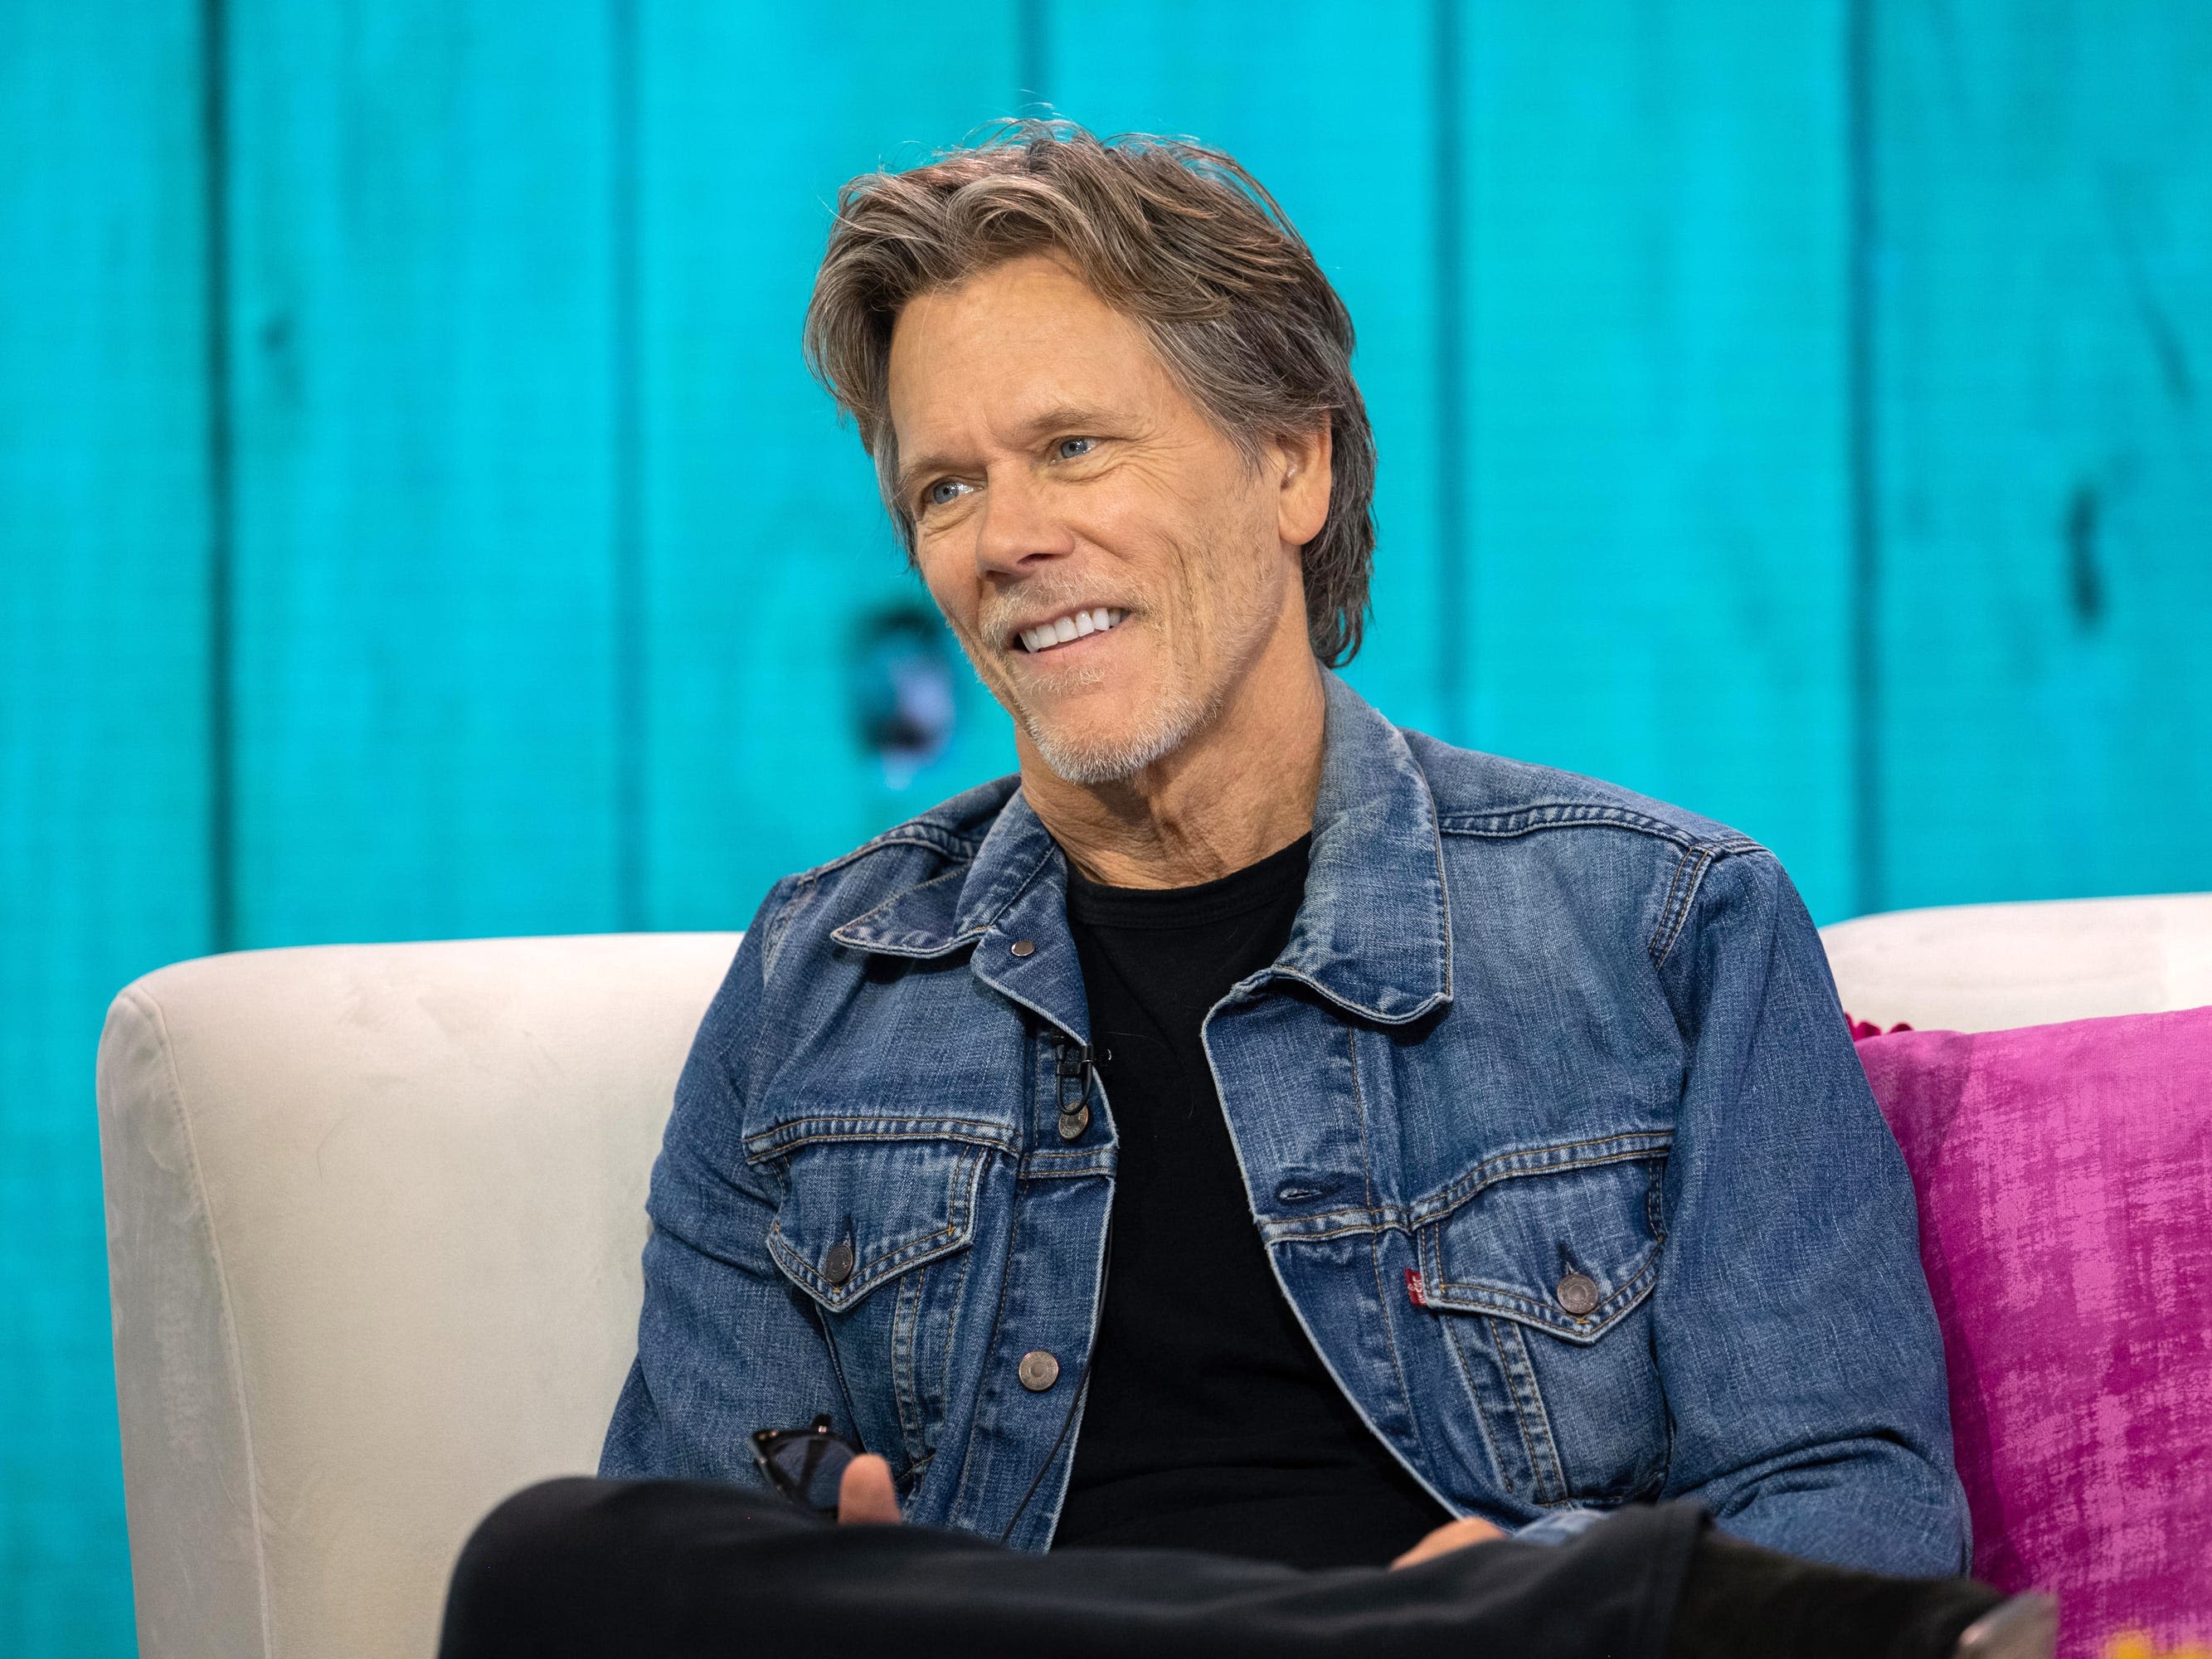 Kevin Bacon said he once walked around in LA in disguise, found out what it's like to be a regular guy: 'This sucks'